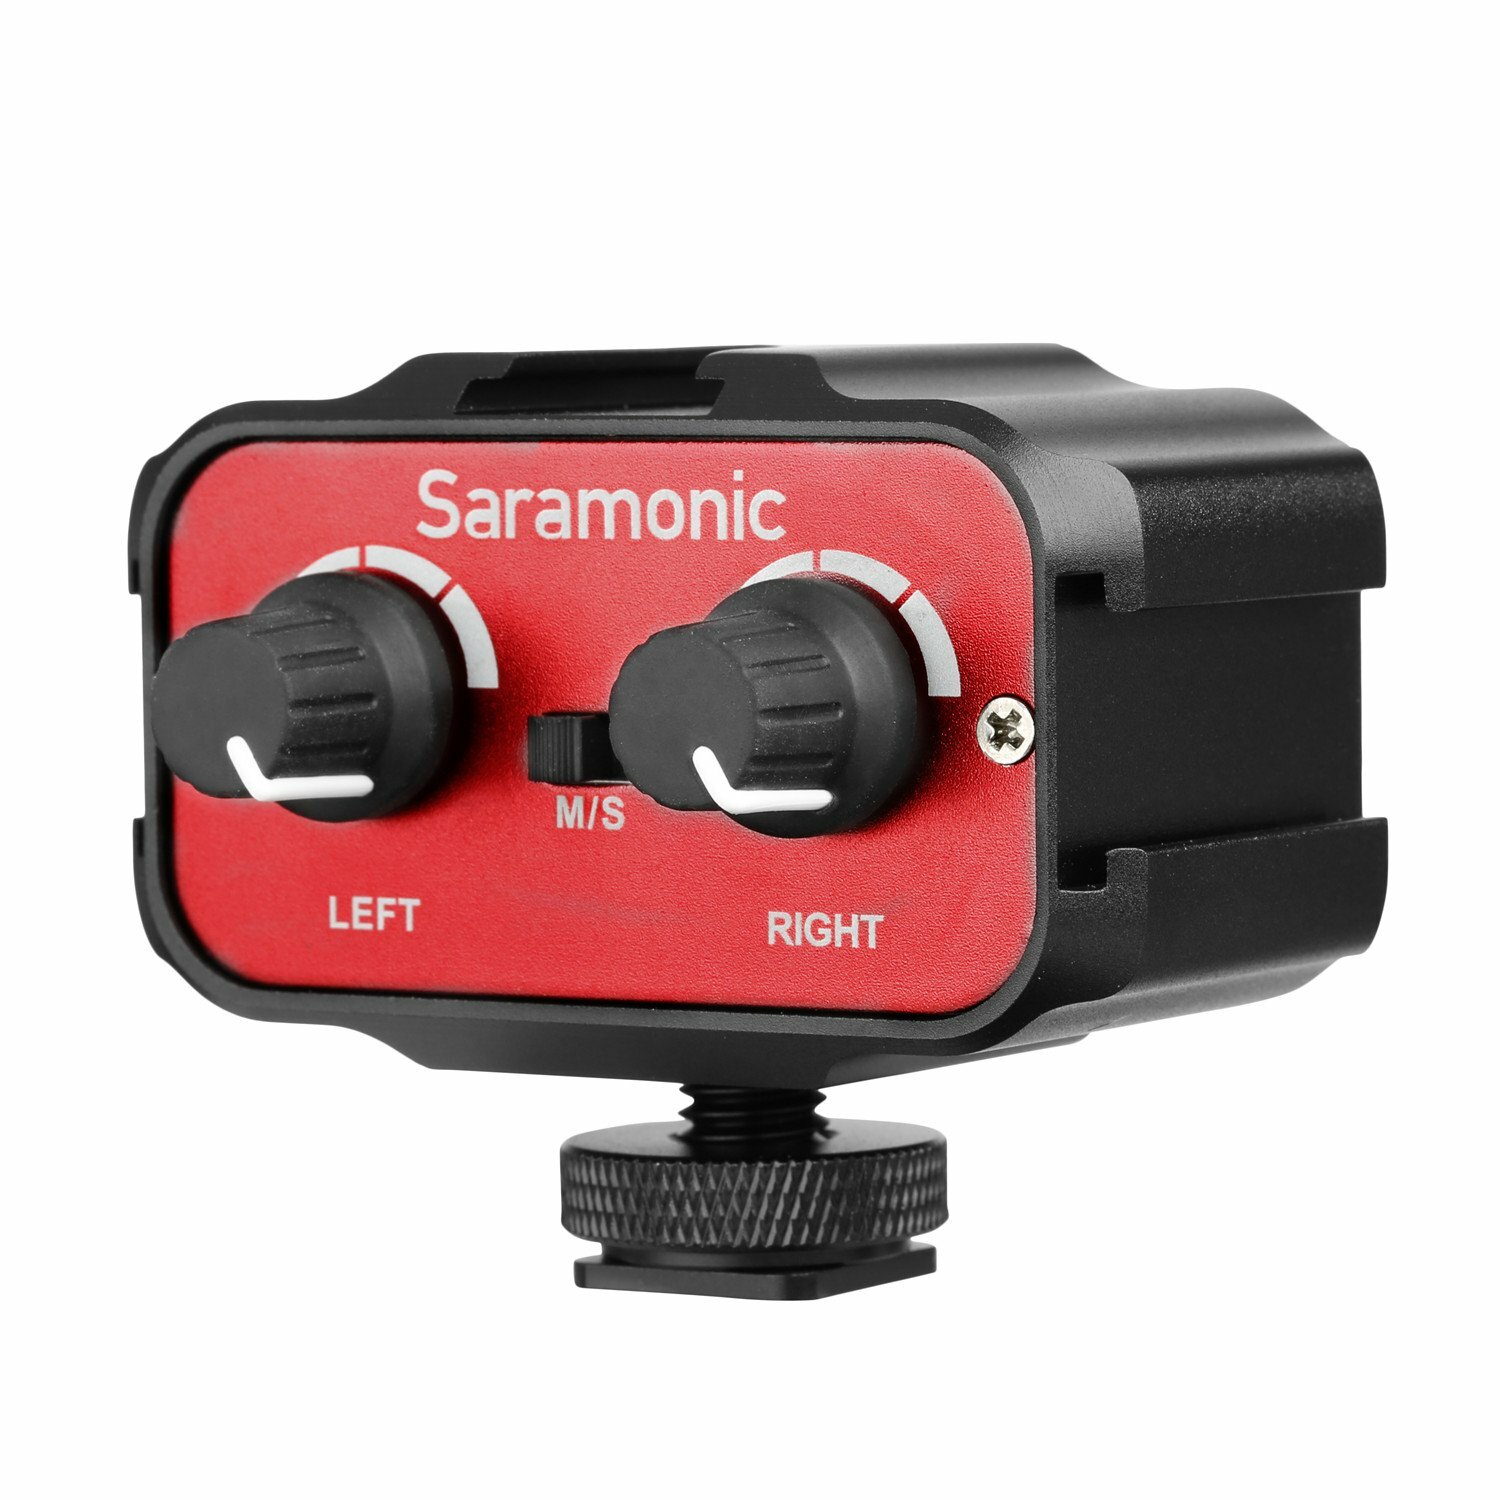 

Saramonic SR-AX100 Microphone Audio Mixer Adapter with Cold Shoe Mounting Hub with Stereo Dual Mono 3.5mm Input for DSLR